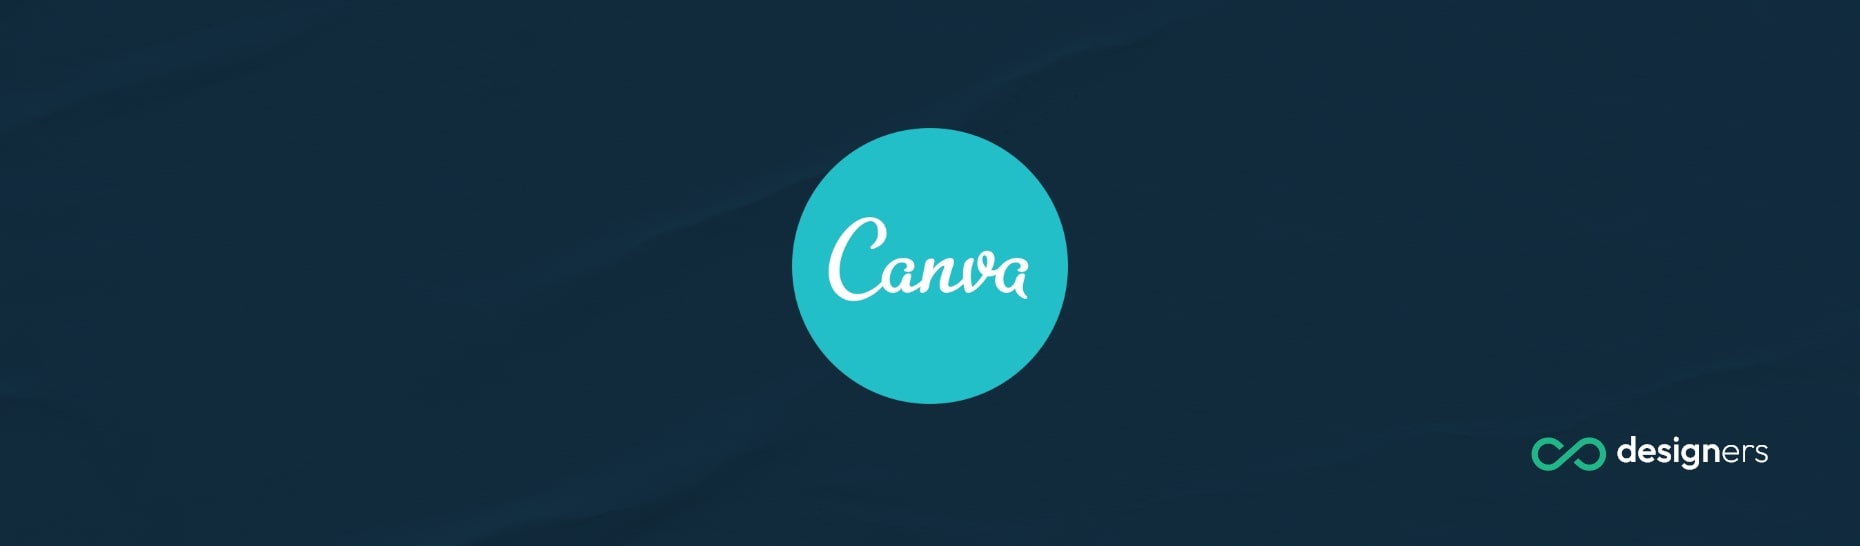  Can I Put a Youtube Video in Canva?